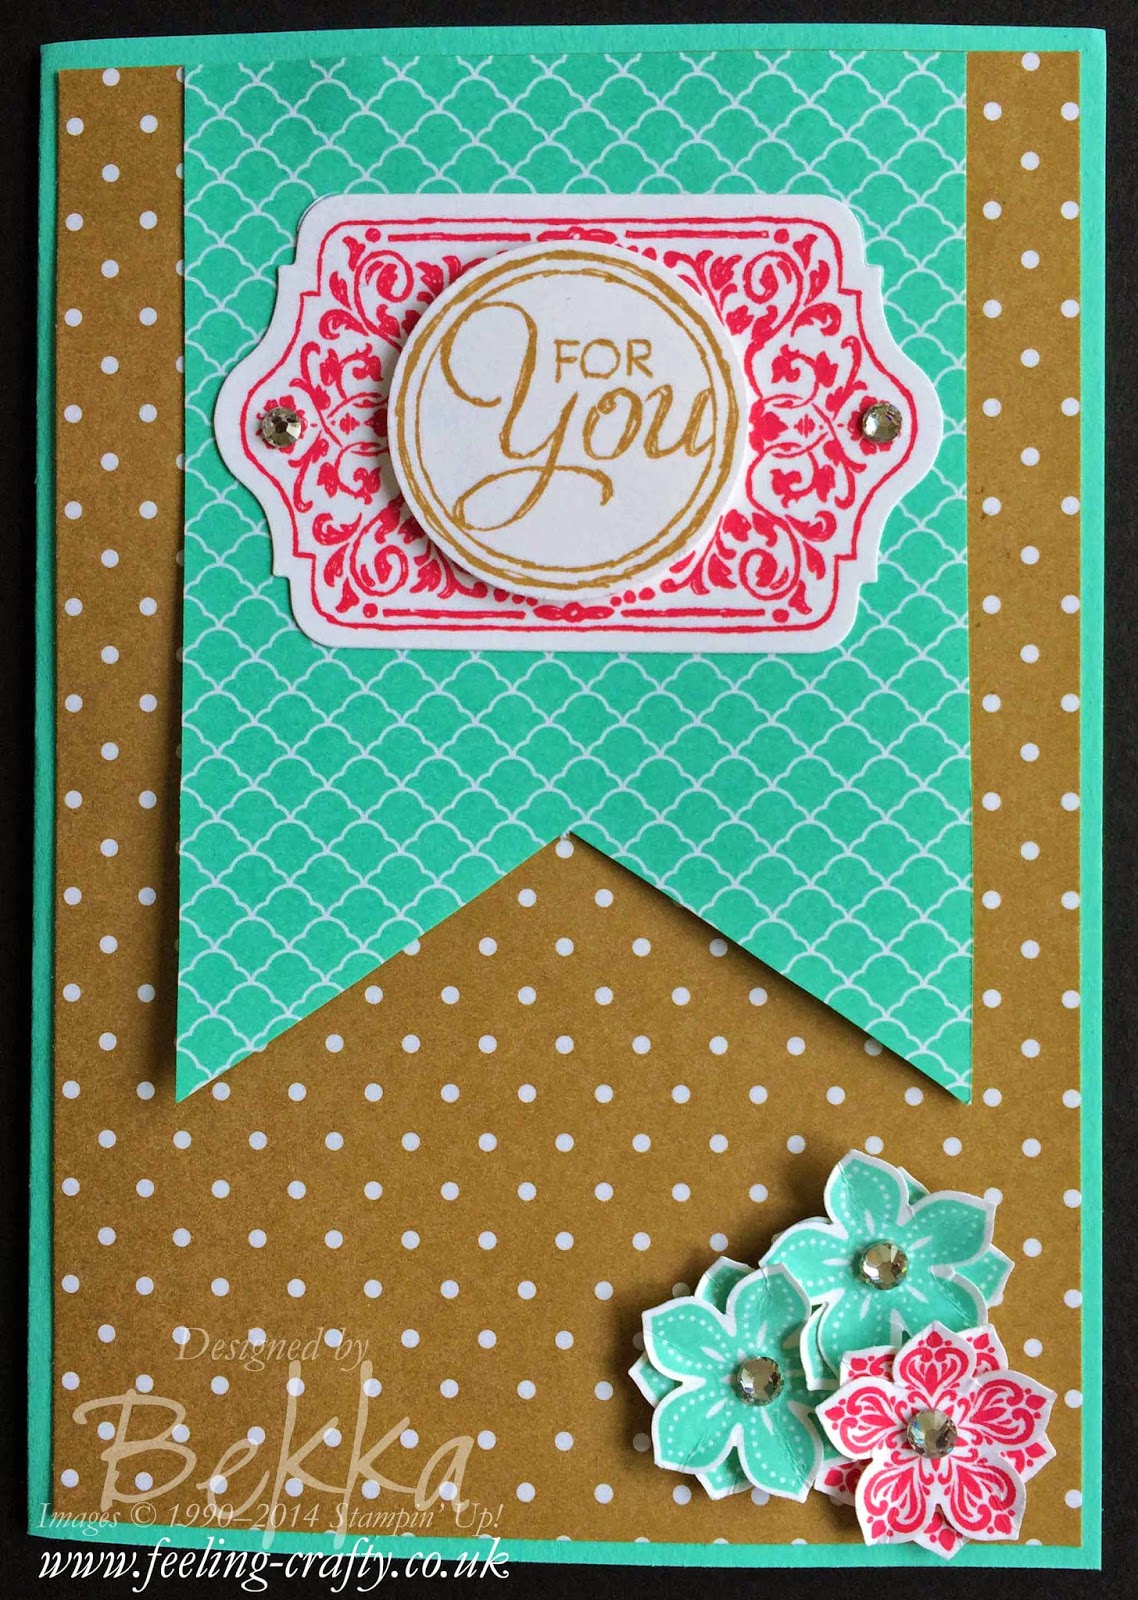 Just for you card made at a Stampin' Up! Party with UK Independent Demonstrator Bekka